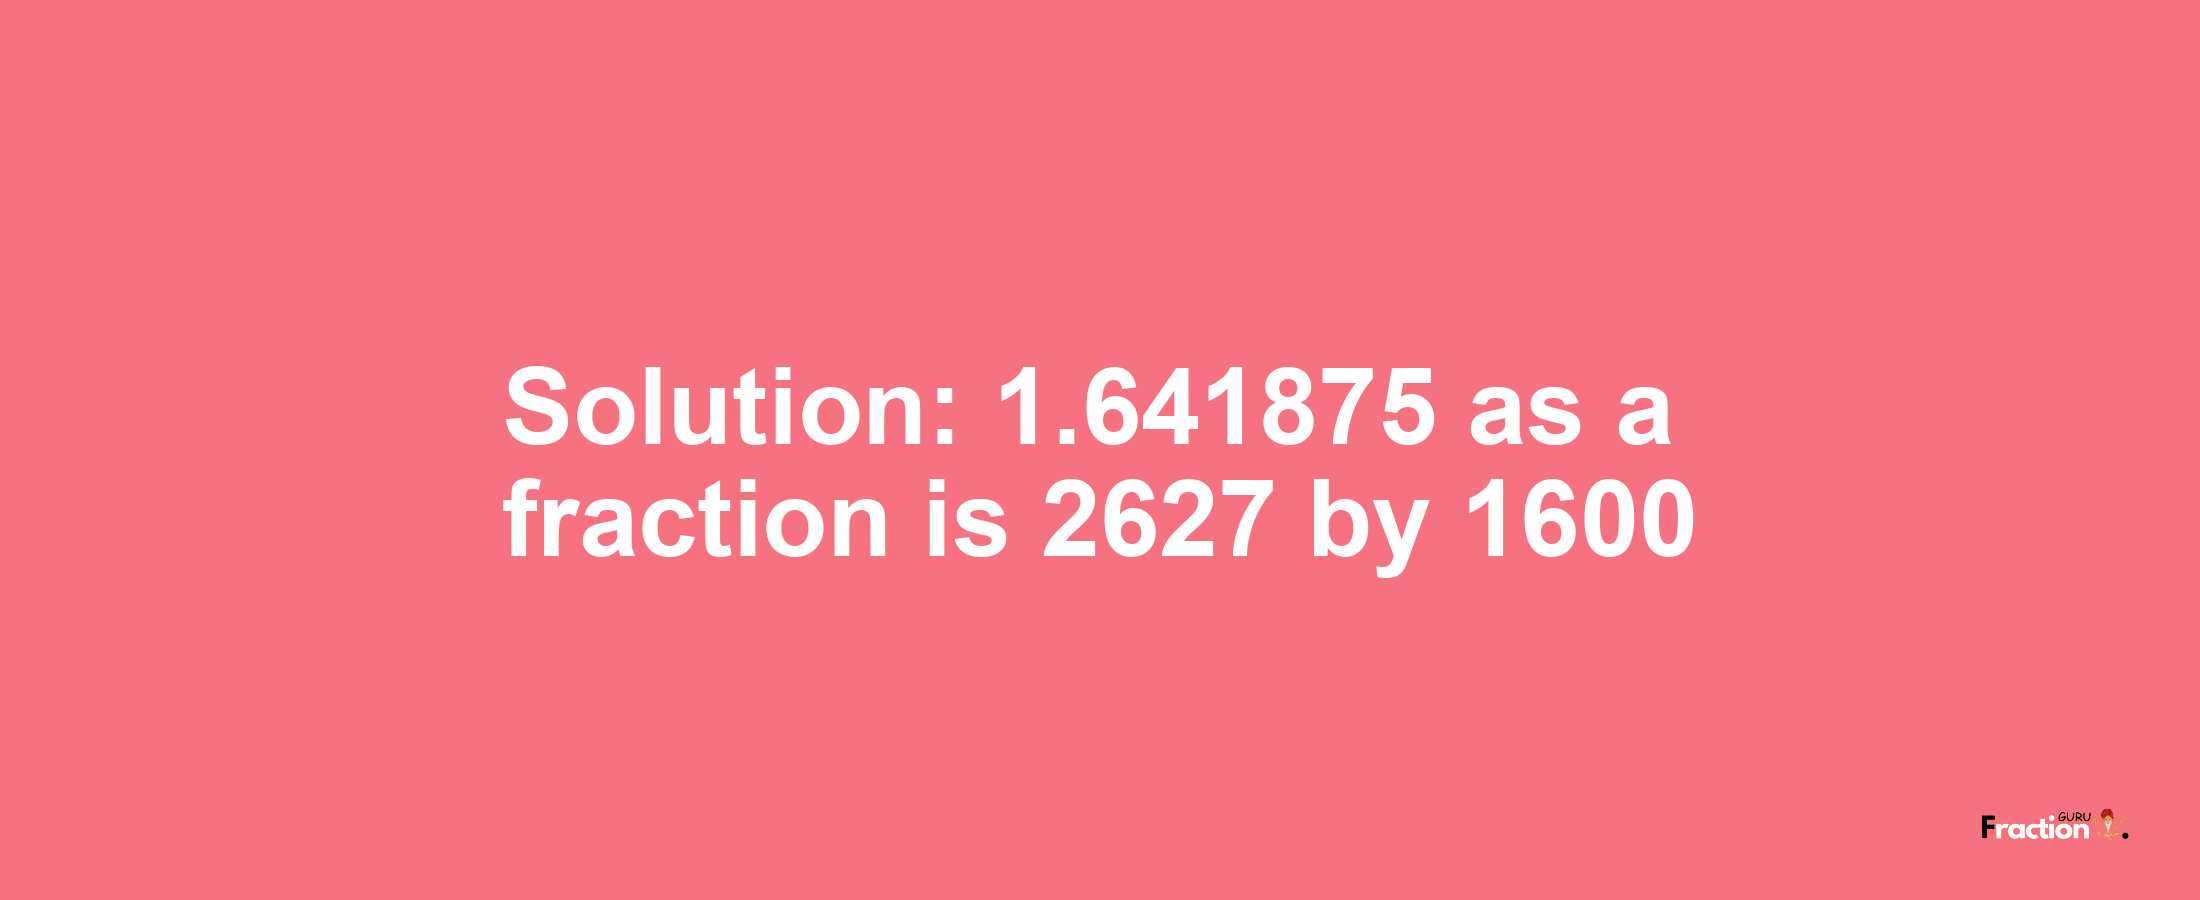 Solution:1.641875 as a fraction is 2627/1600